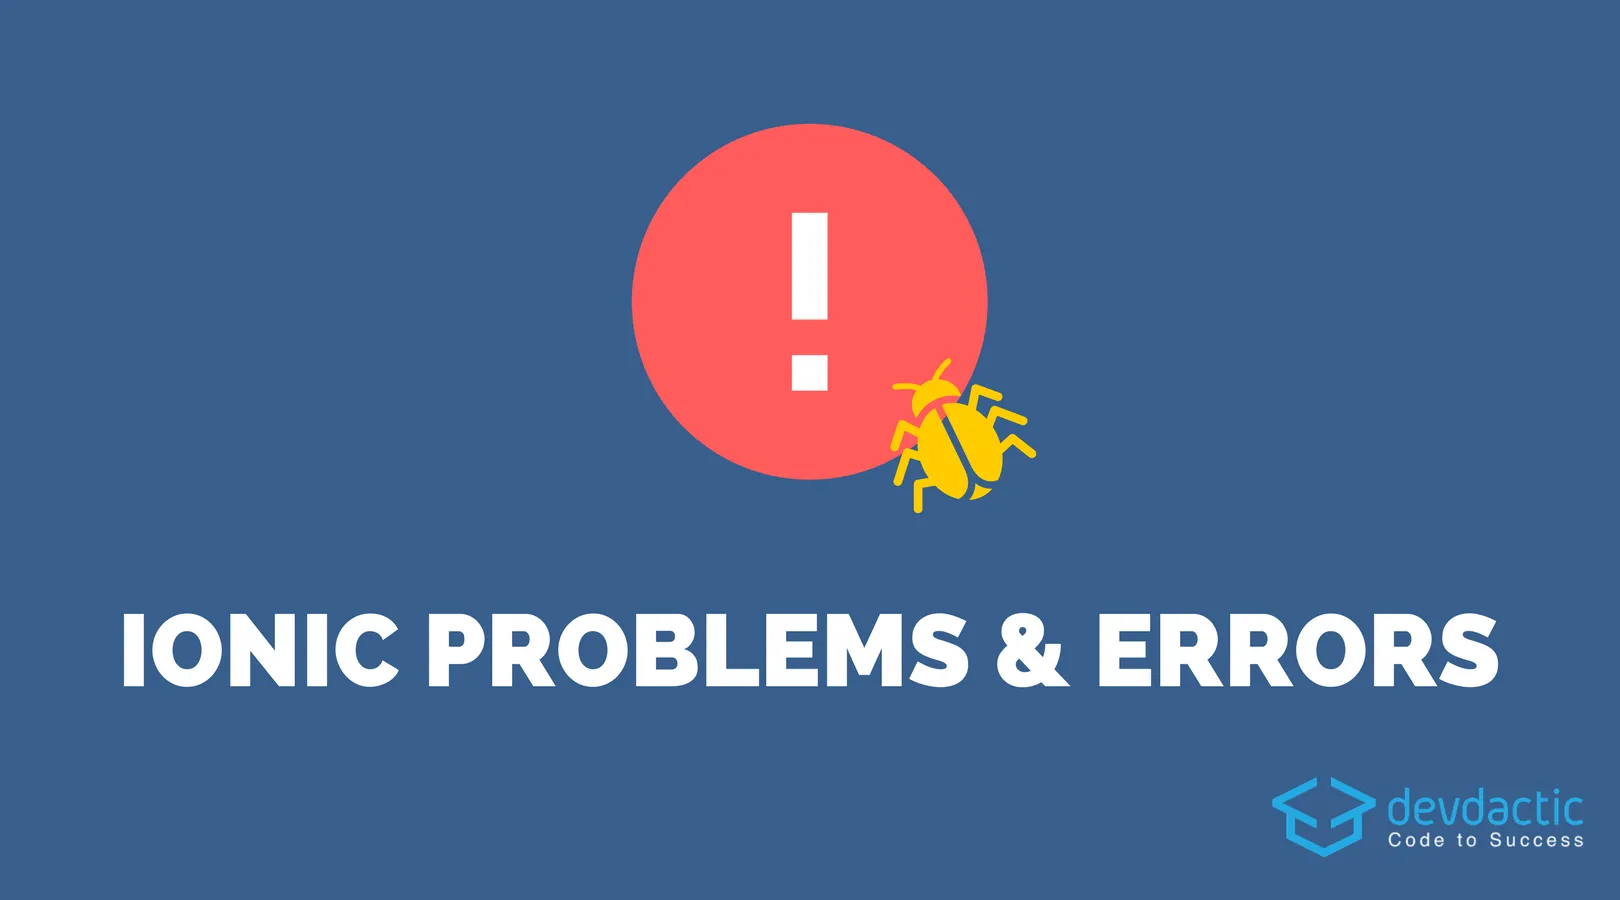 10 Common Ionic Problems & Error Messages (And How to Fix Them)